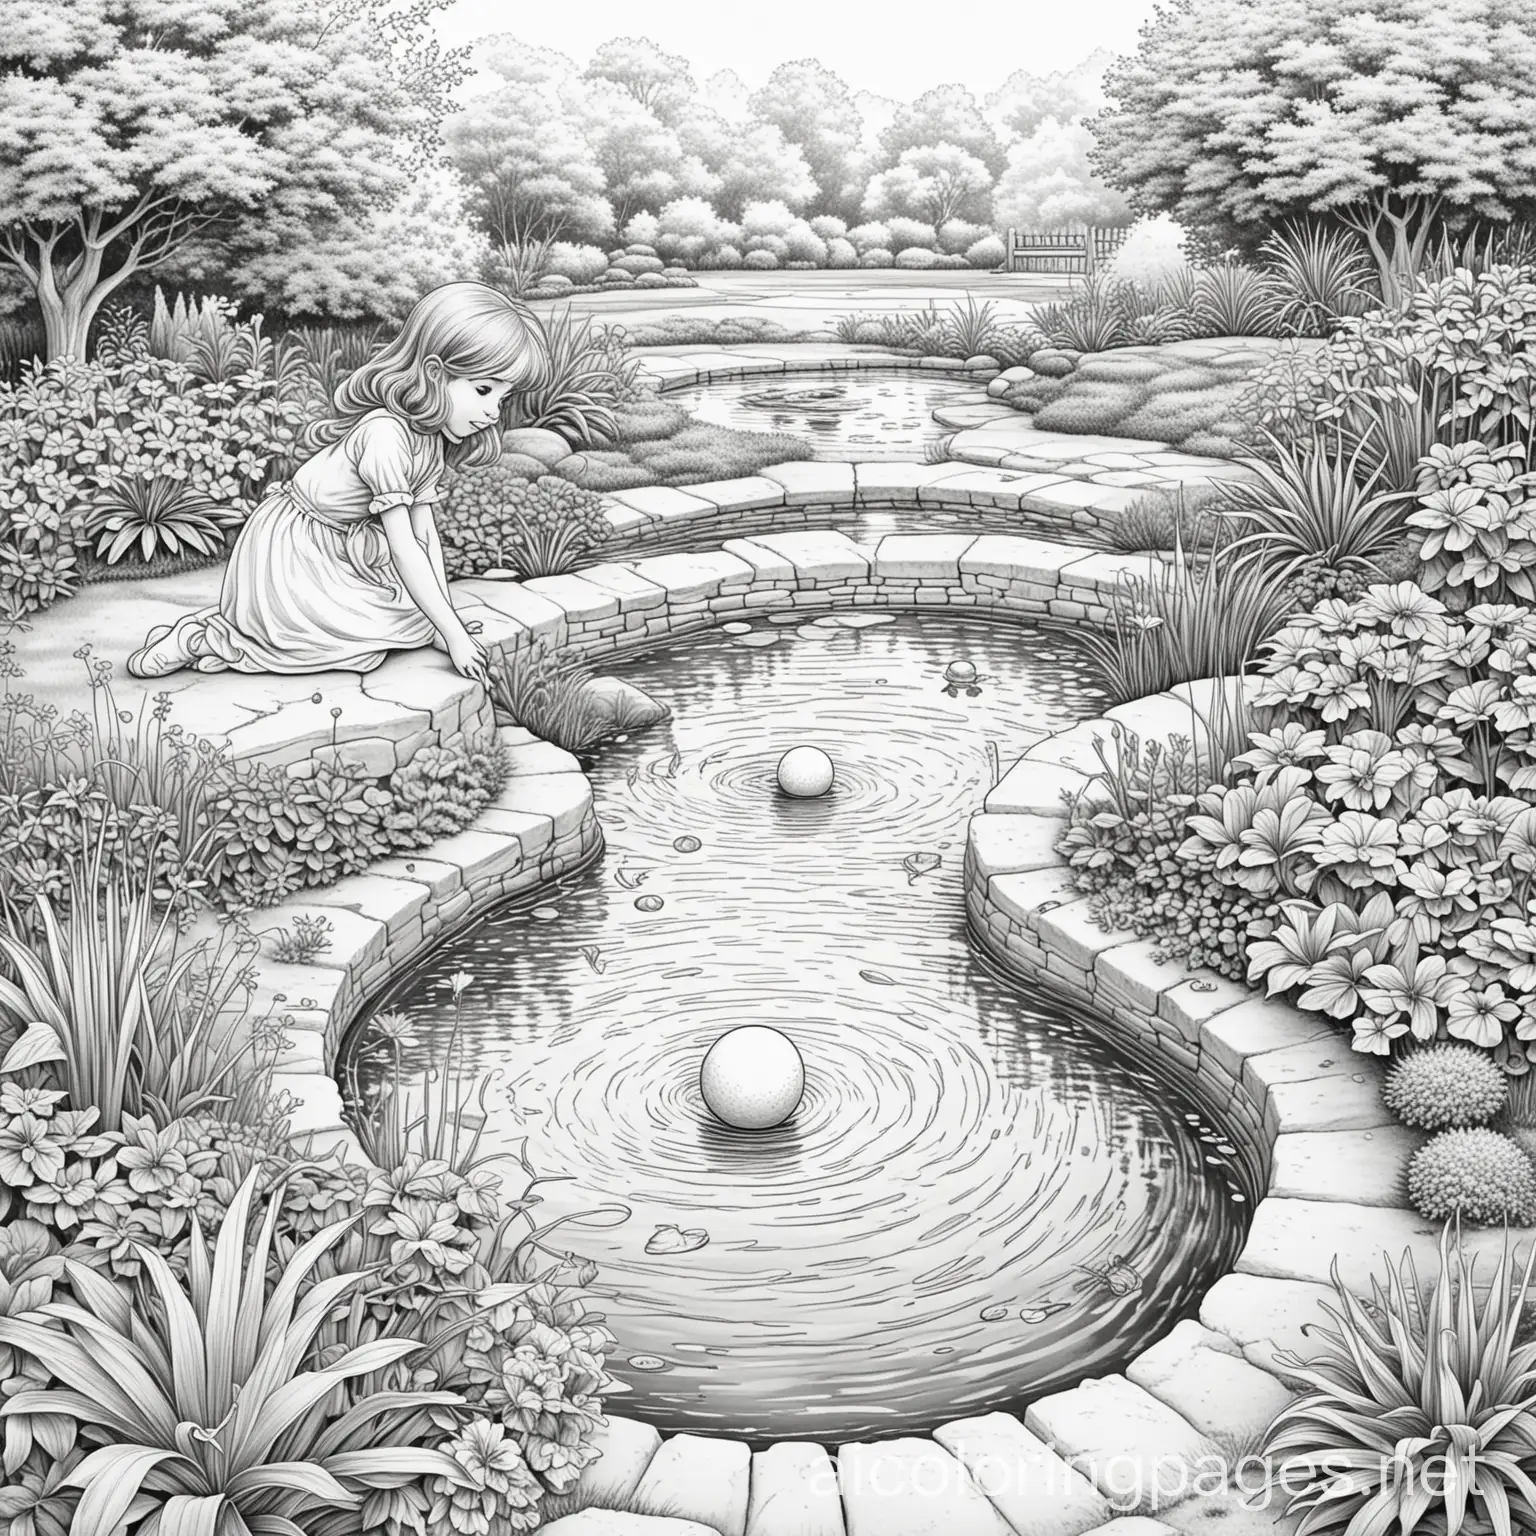 Princess-Playing-with-a-Ball-in-Garden-with-Pond-Coloring-Page